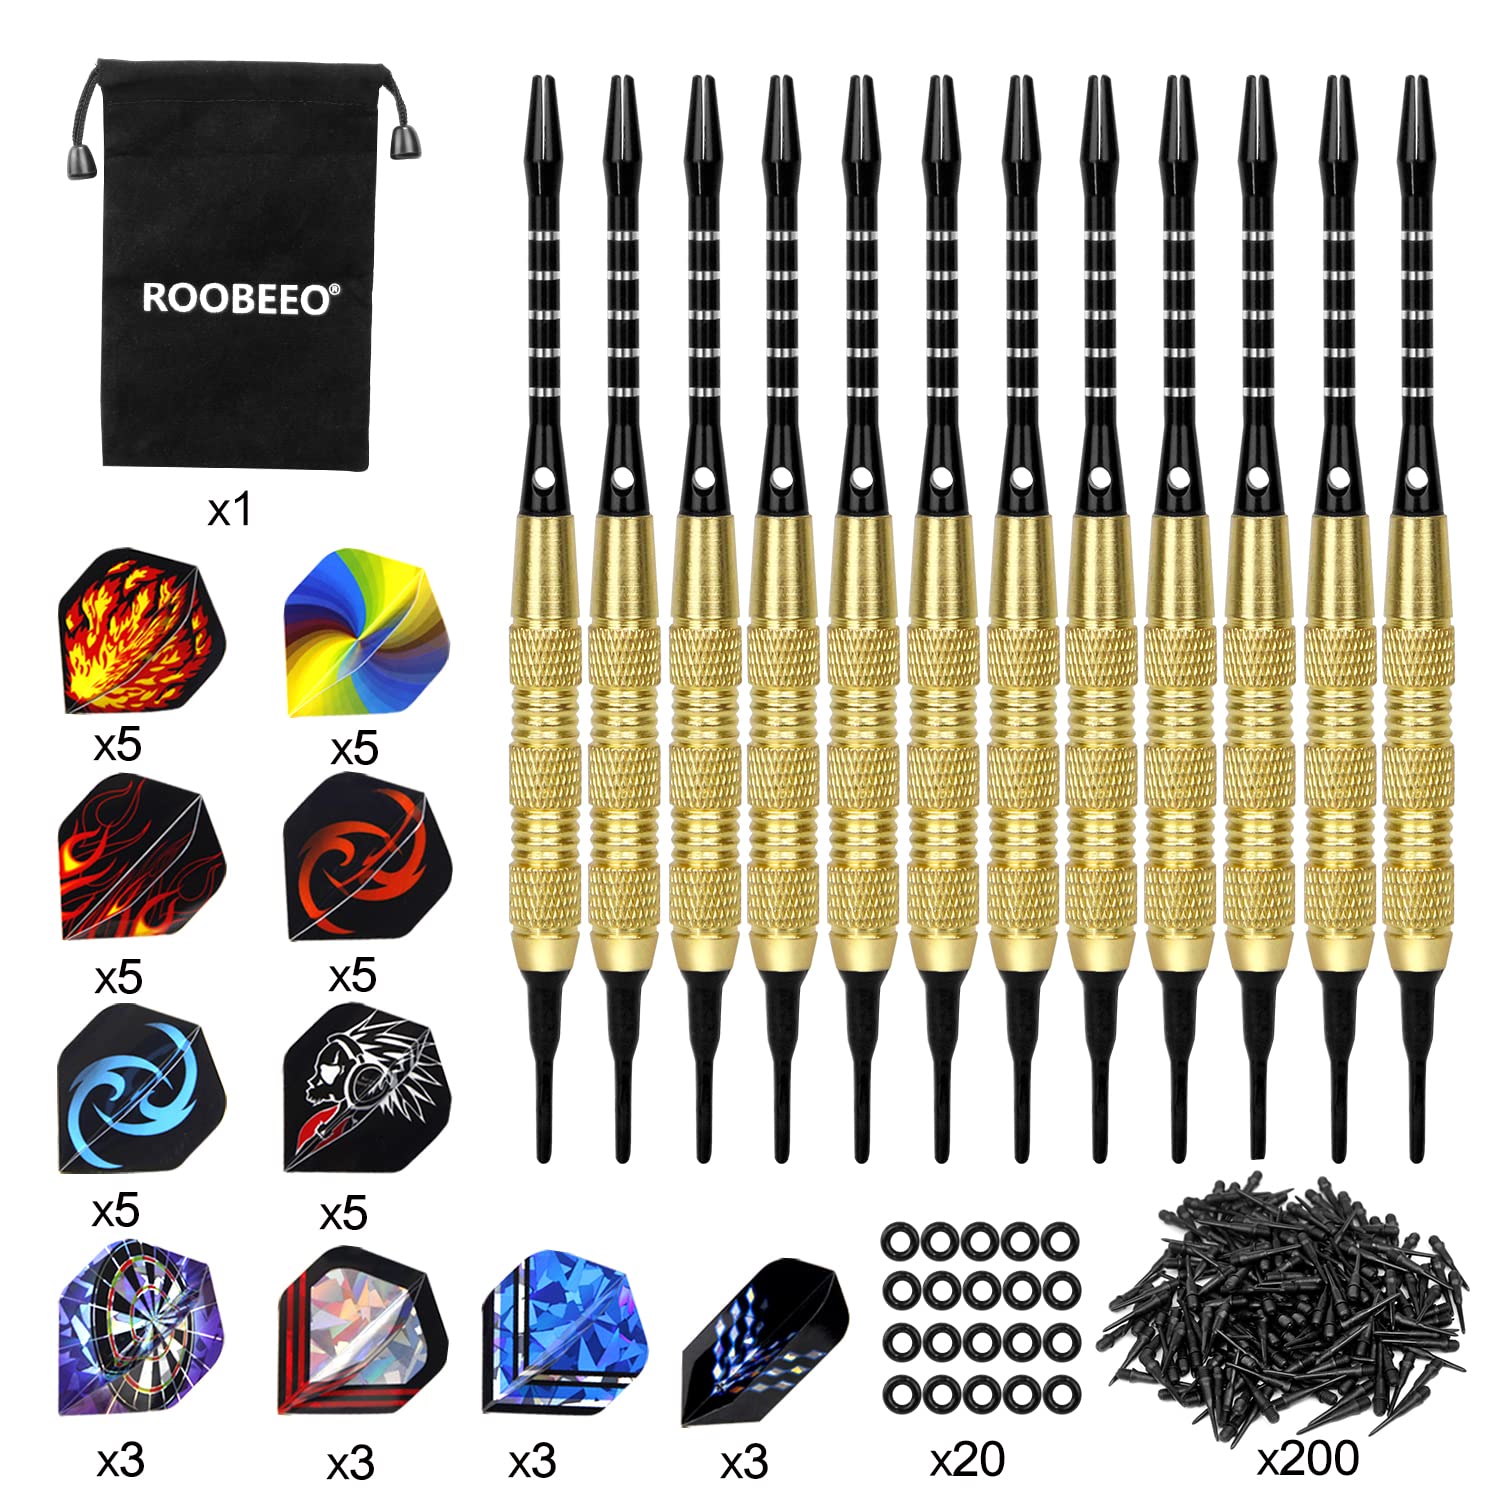 ROOBEEO Soft Tip Darts 12 Pcs 18g Plastic Tip Darts Set with Brass Steel Barrels&Aluminum Shafts,200 Extra Dart Tips 42 Dart Flights 20 Extra Rubber Rings and 1 Storage Bag for Electronic Dart Board